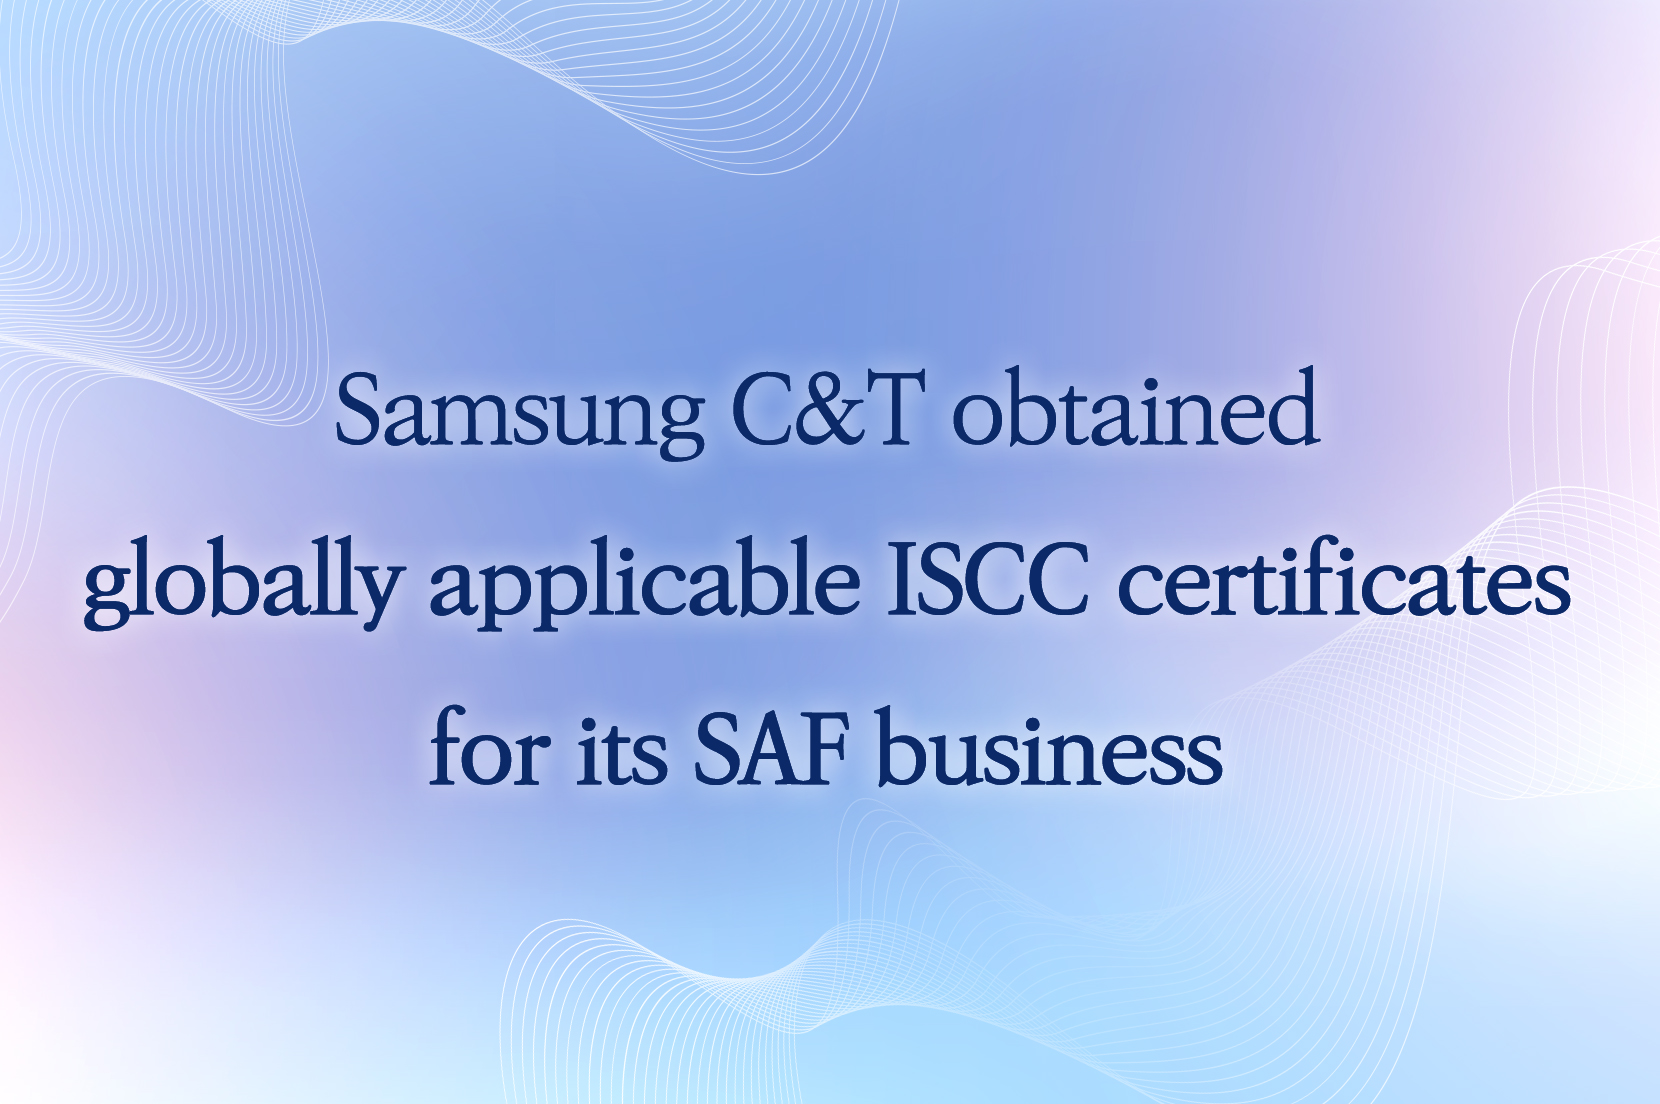 Samsung C&T obtained globally applicable ISCC certificates for its SAF business 이미지